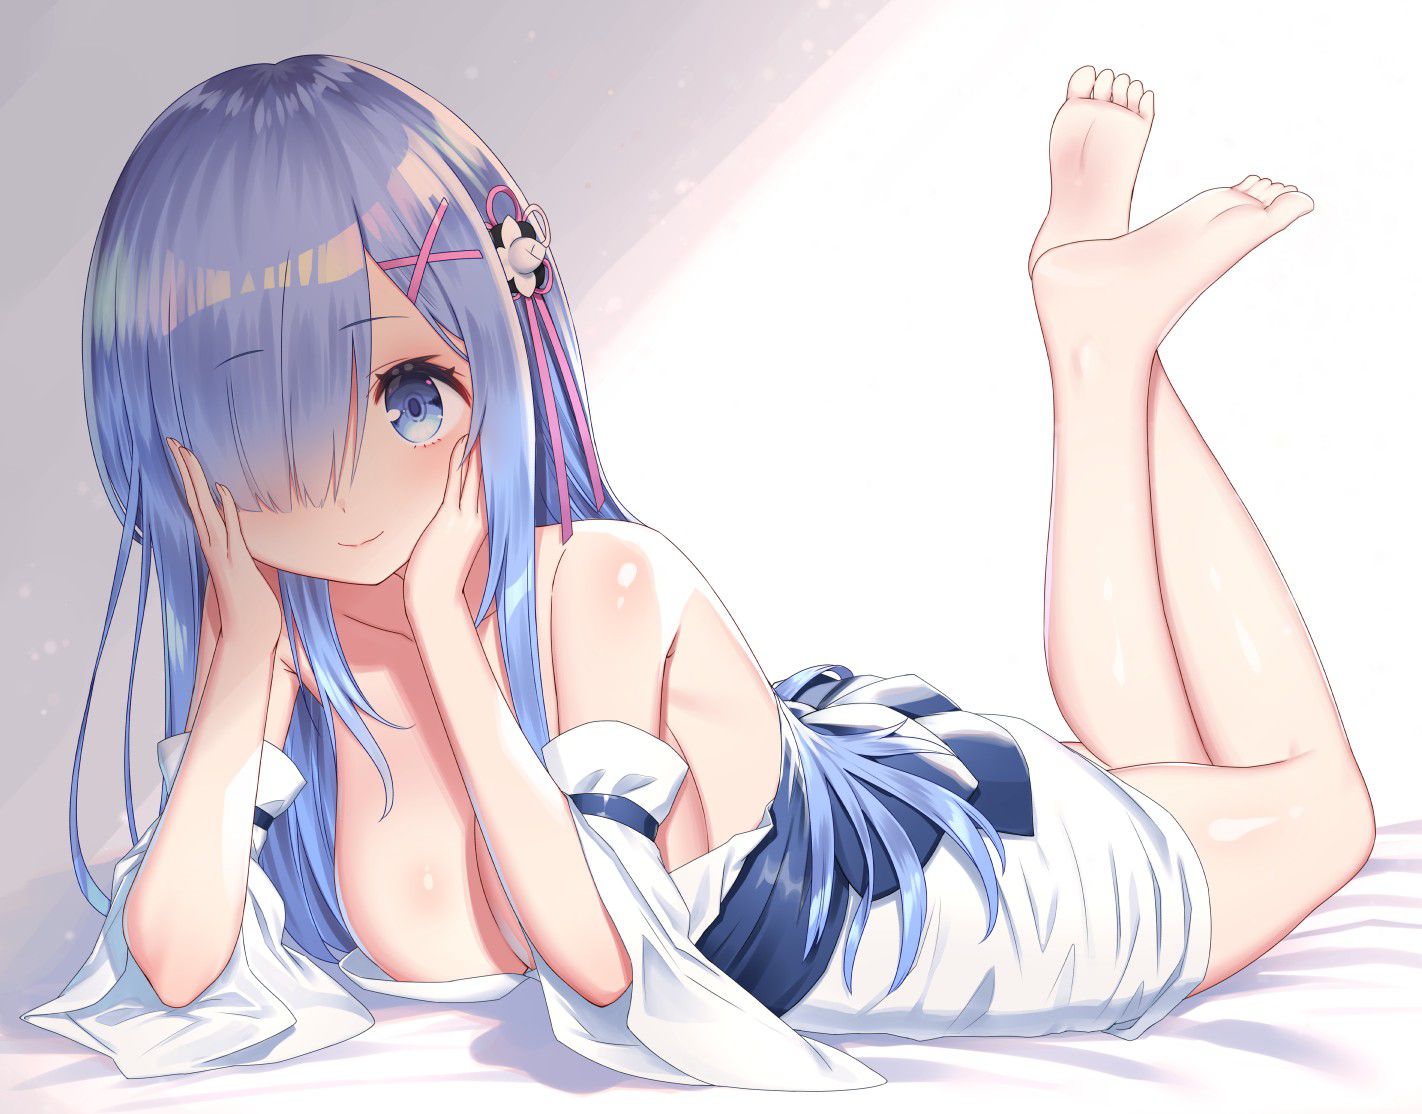 [Secondary] erotic image of a cute girl with blue hair 16